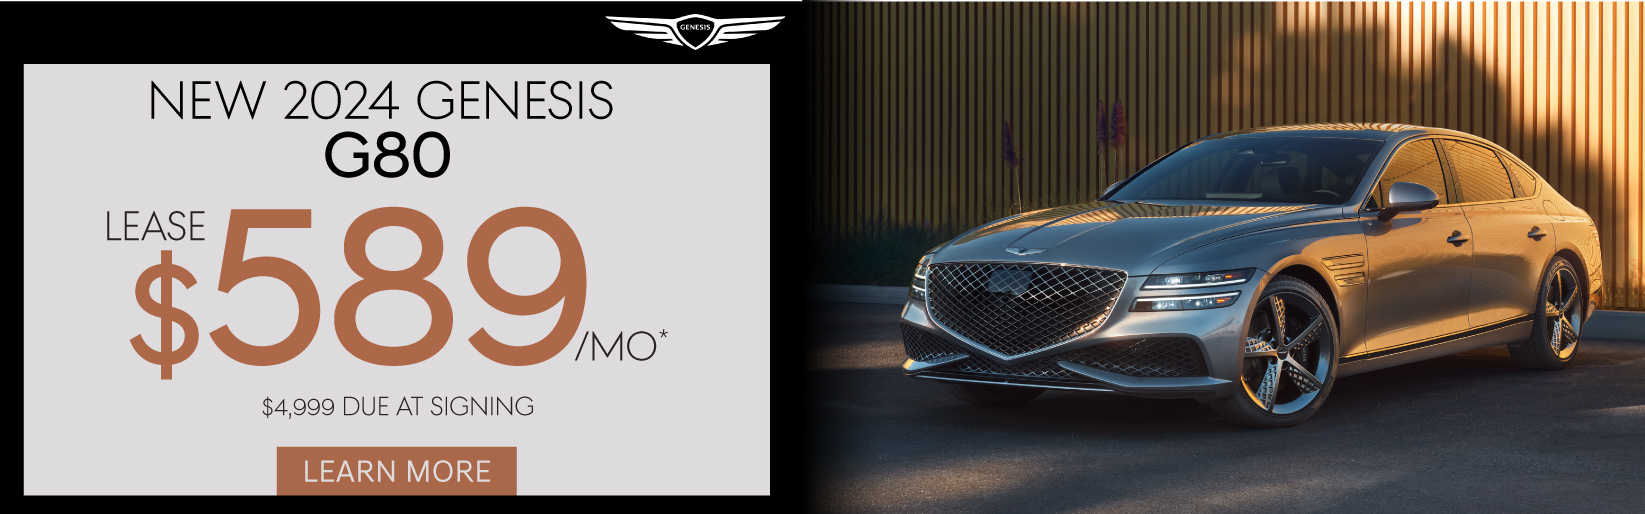 New 2024 Genesis GV70 Lease $599 per month | Learn More